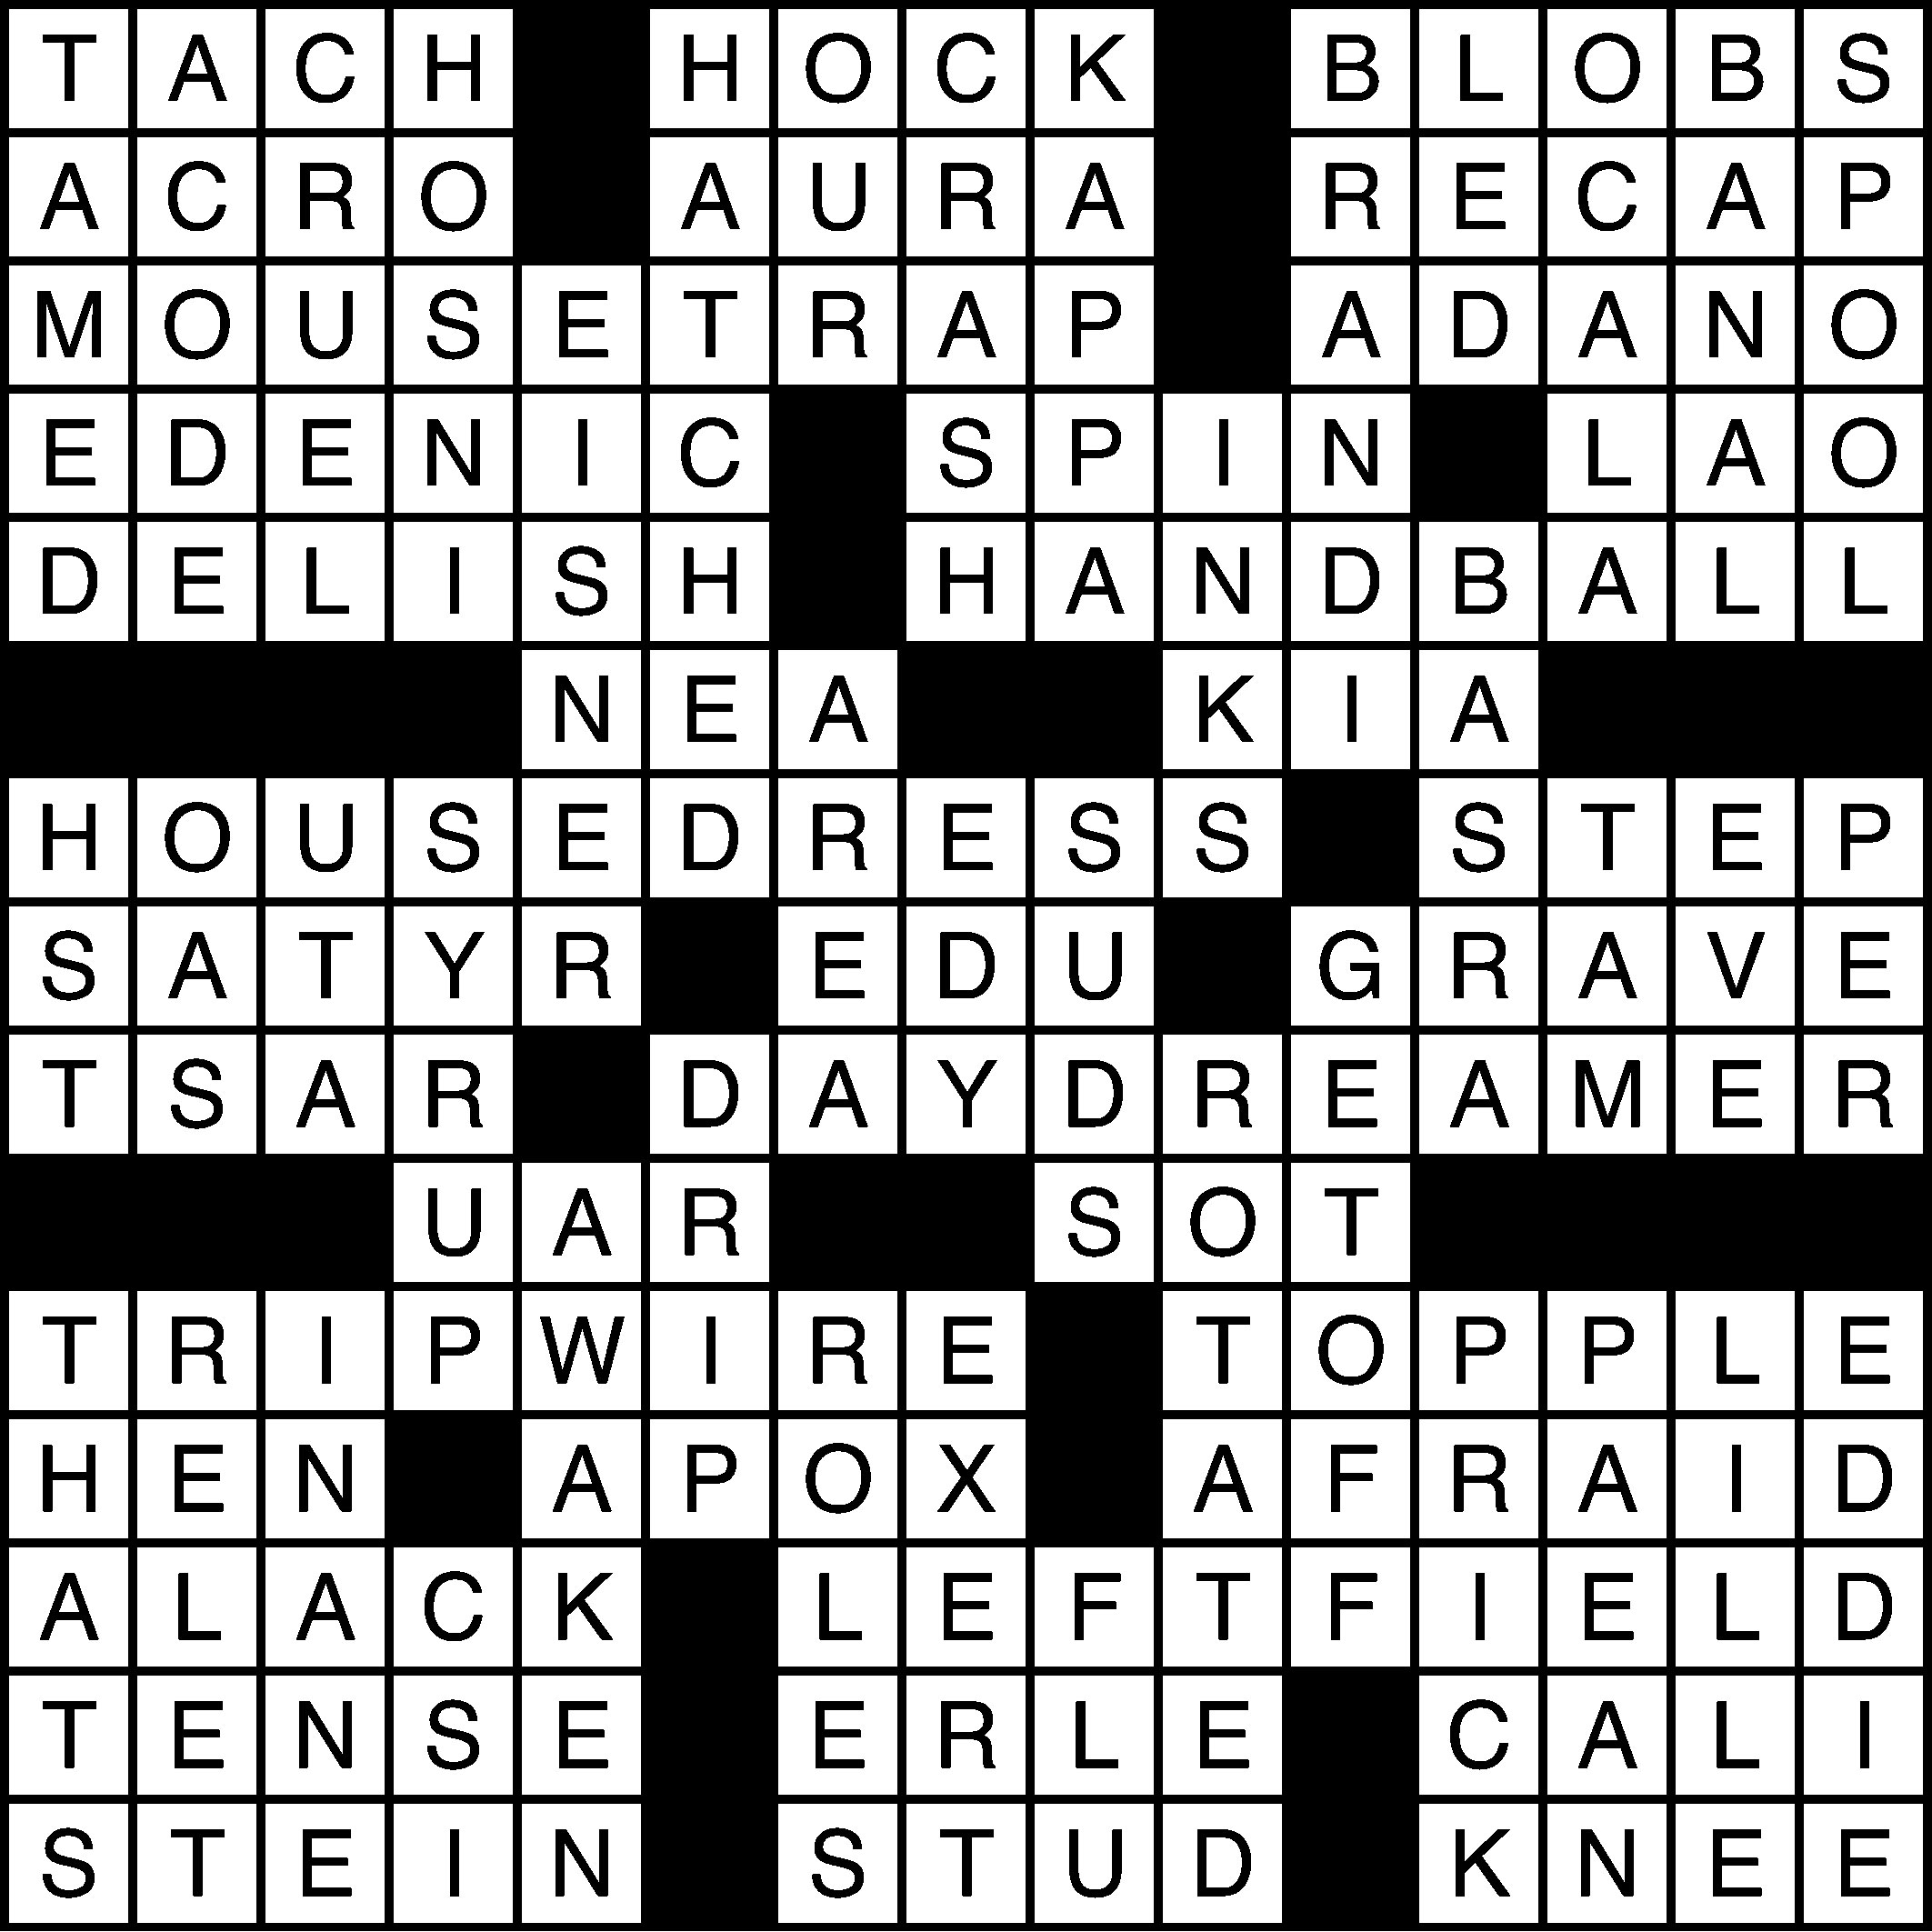 First crossword clue 5 letters